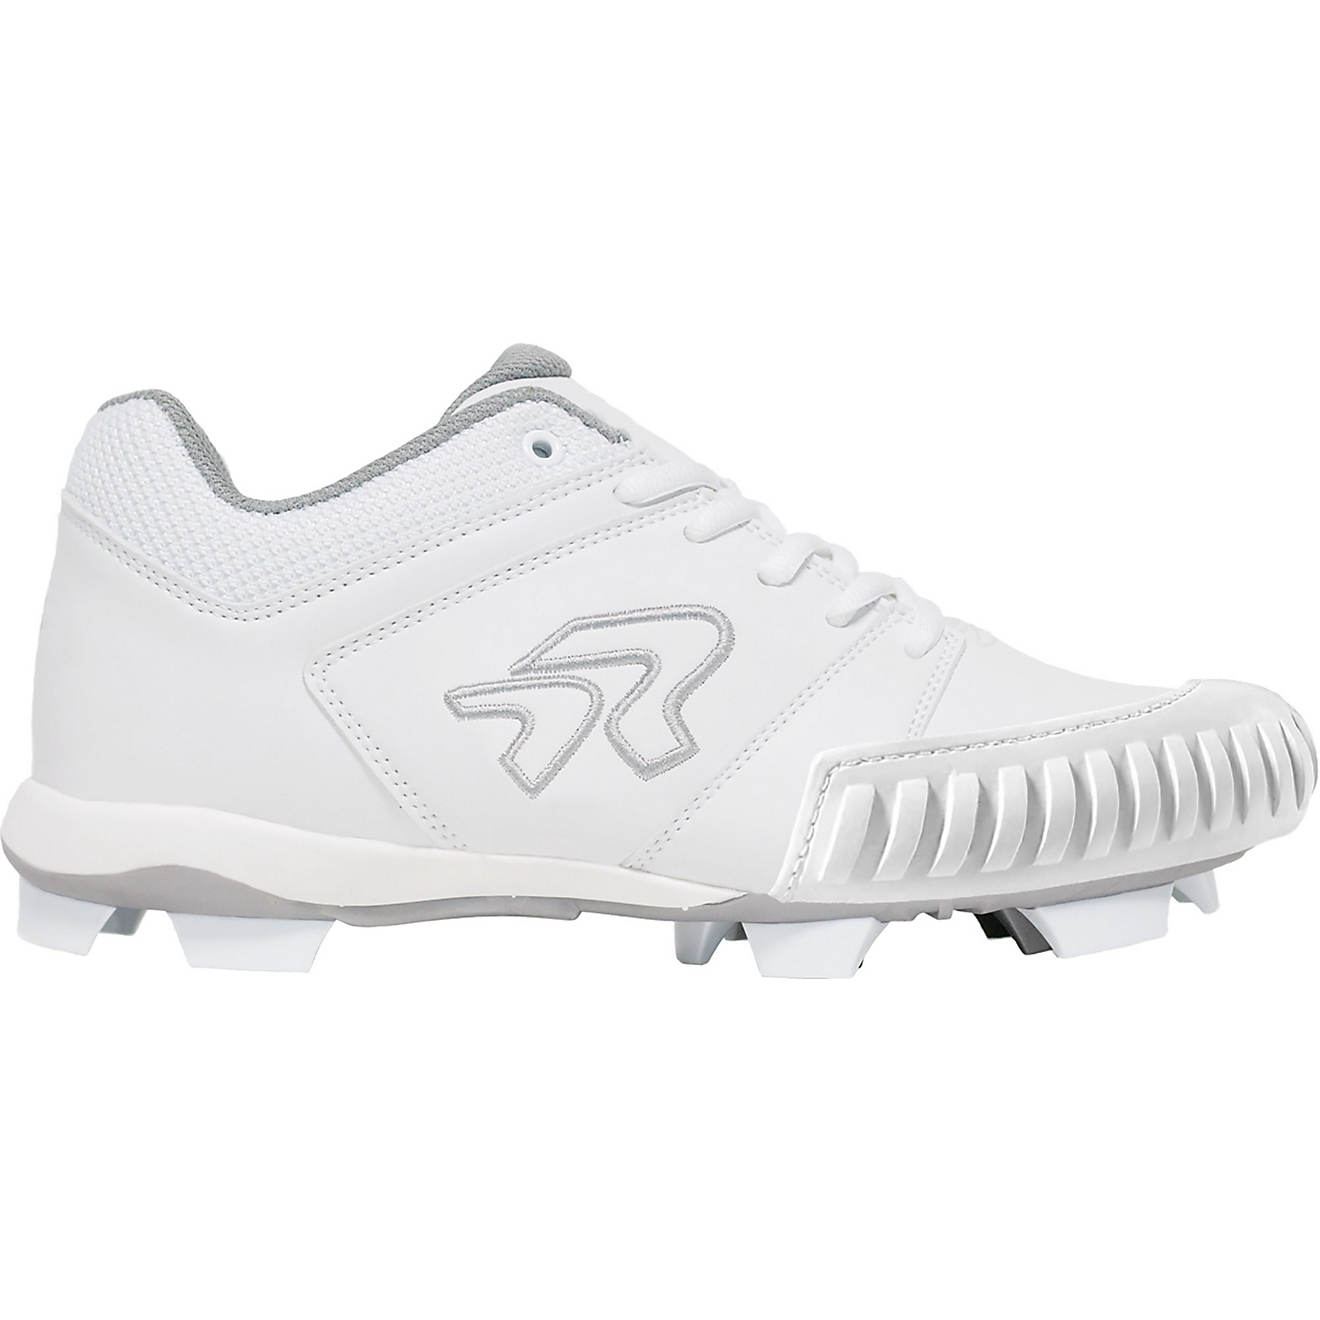 RIP-IT Women's Ringor Flite Pitching Toe Softball Cleats                                                                         - view number 1